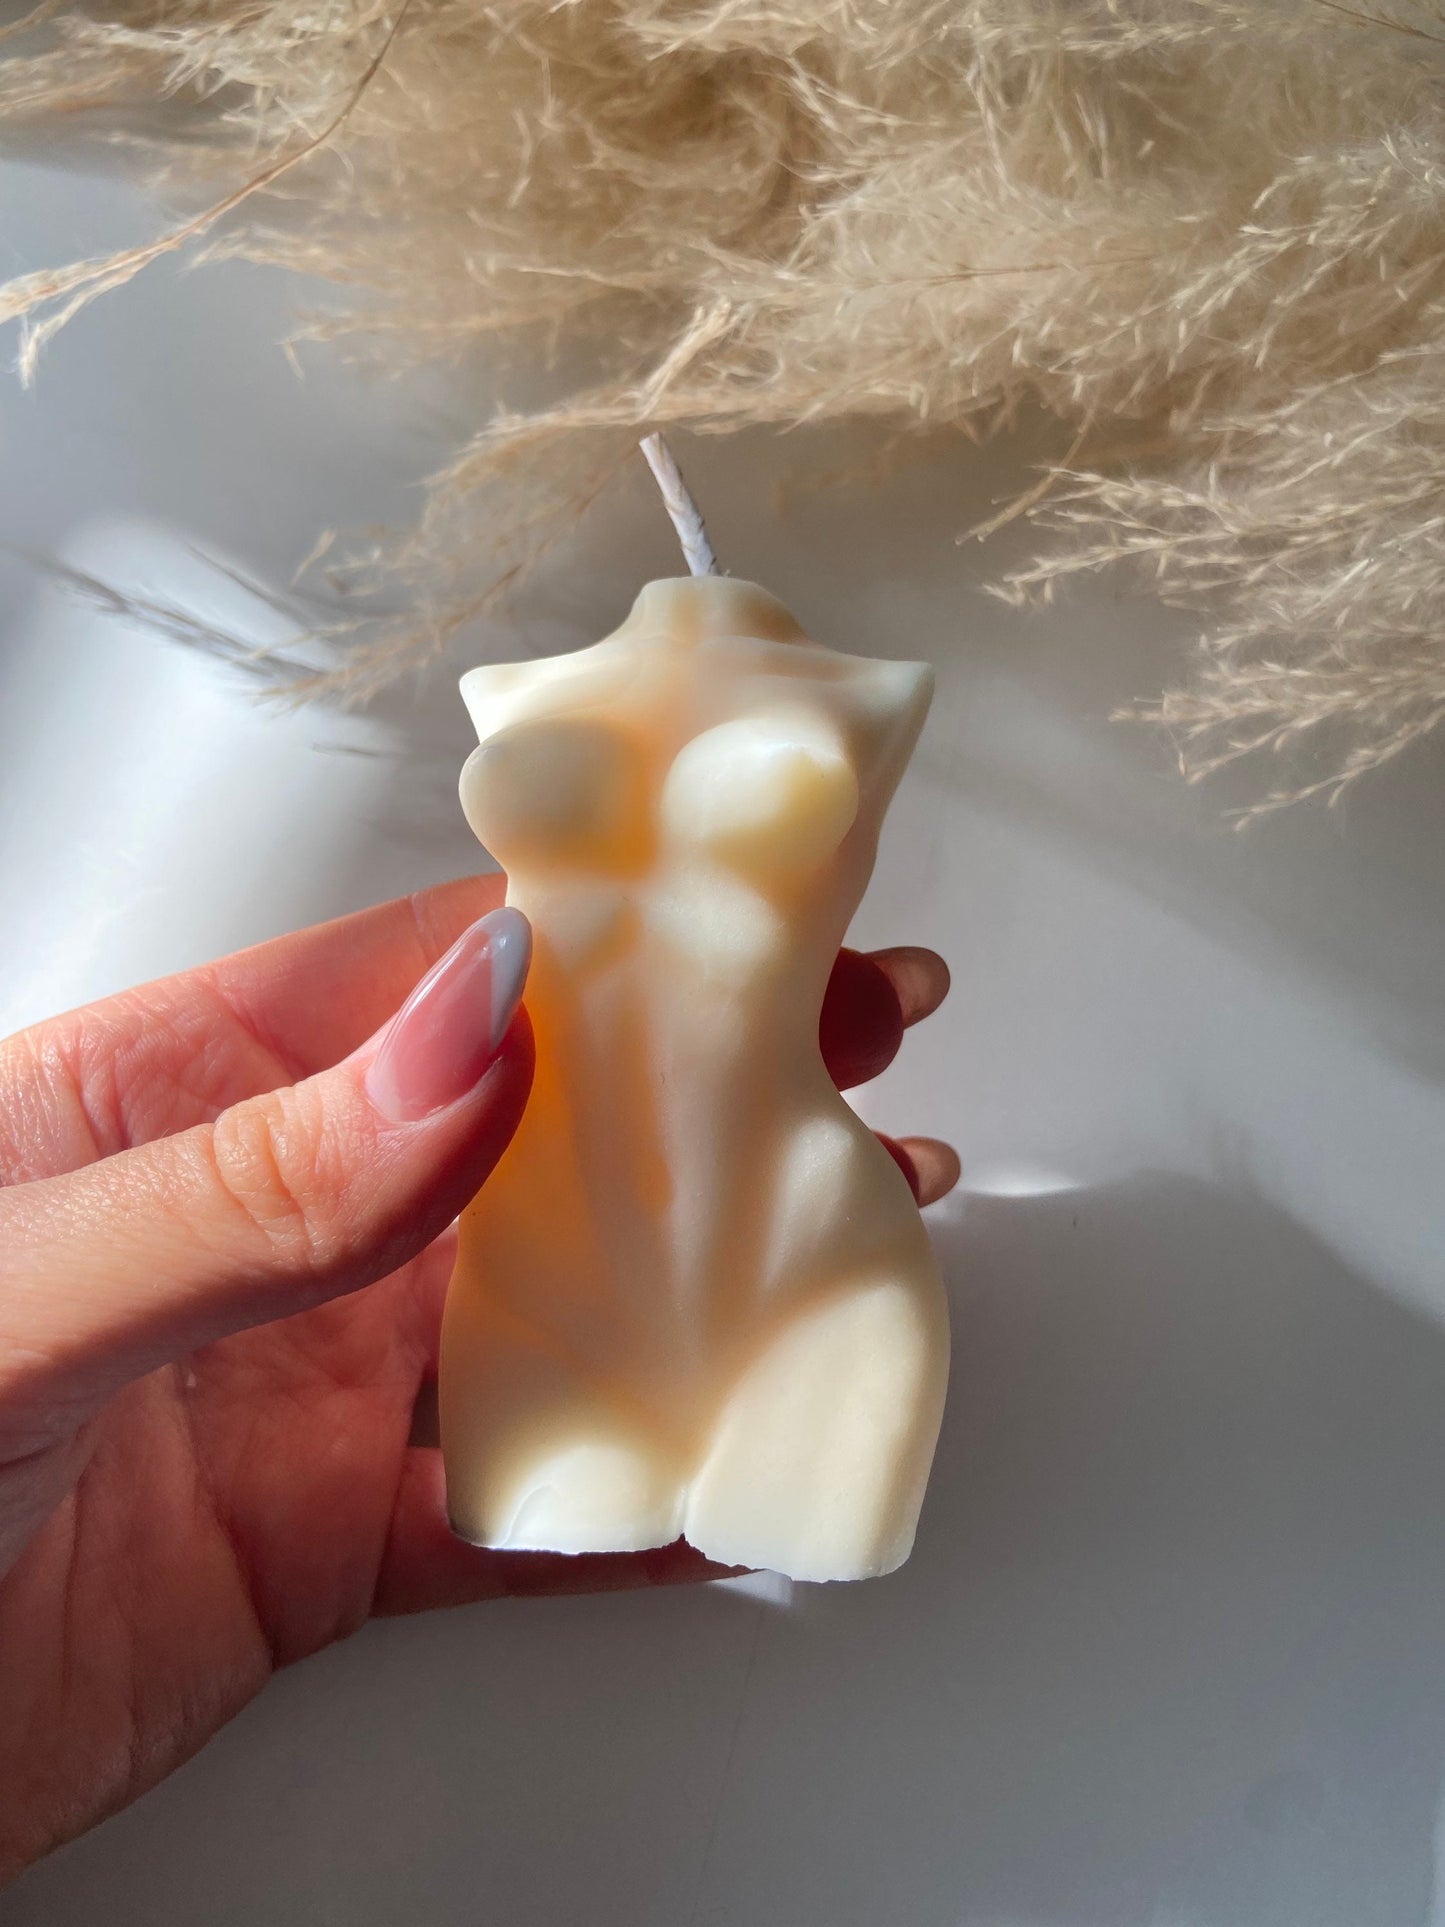 Femme Hourglass Body Candle/Venus Candle/Female Body Candle/Aesthetic Candles/Gifts For Her/Boss Babe Gifts